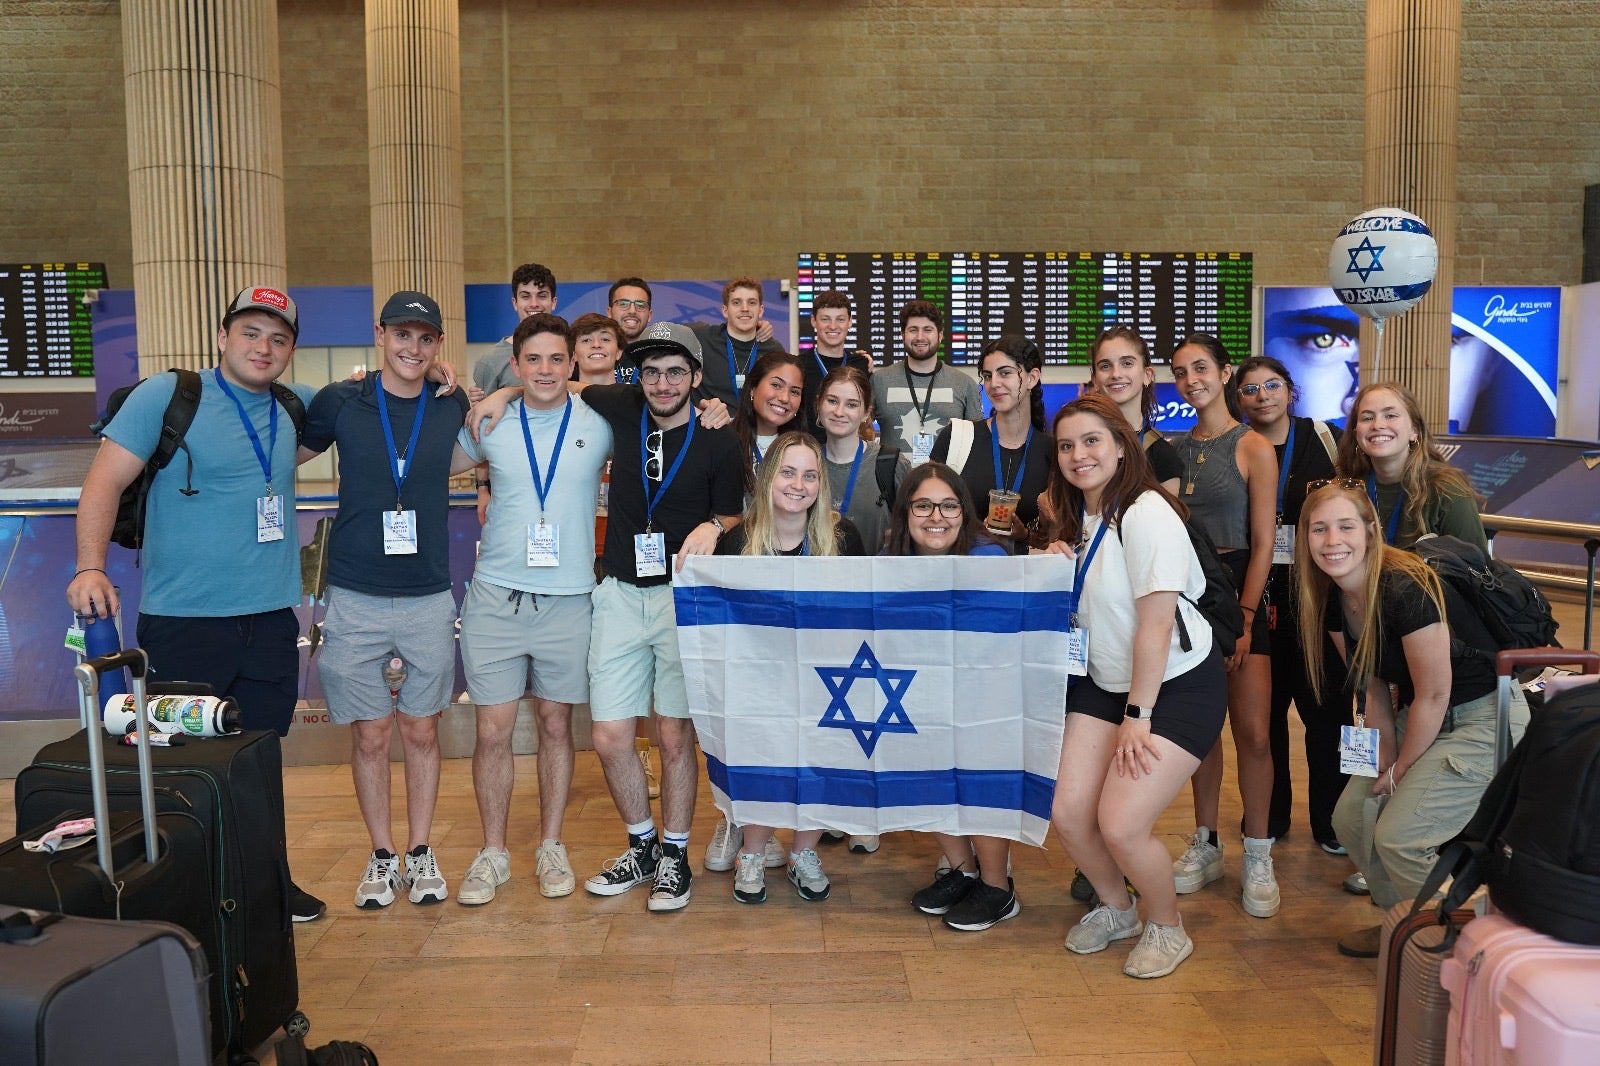 Jewish students from US campuses tour Israel in effort to combat antisemitism